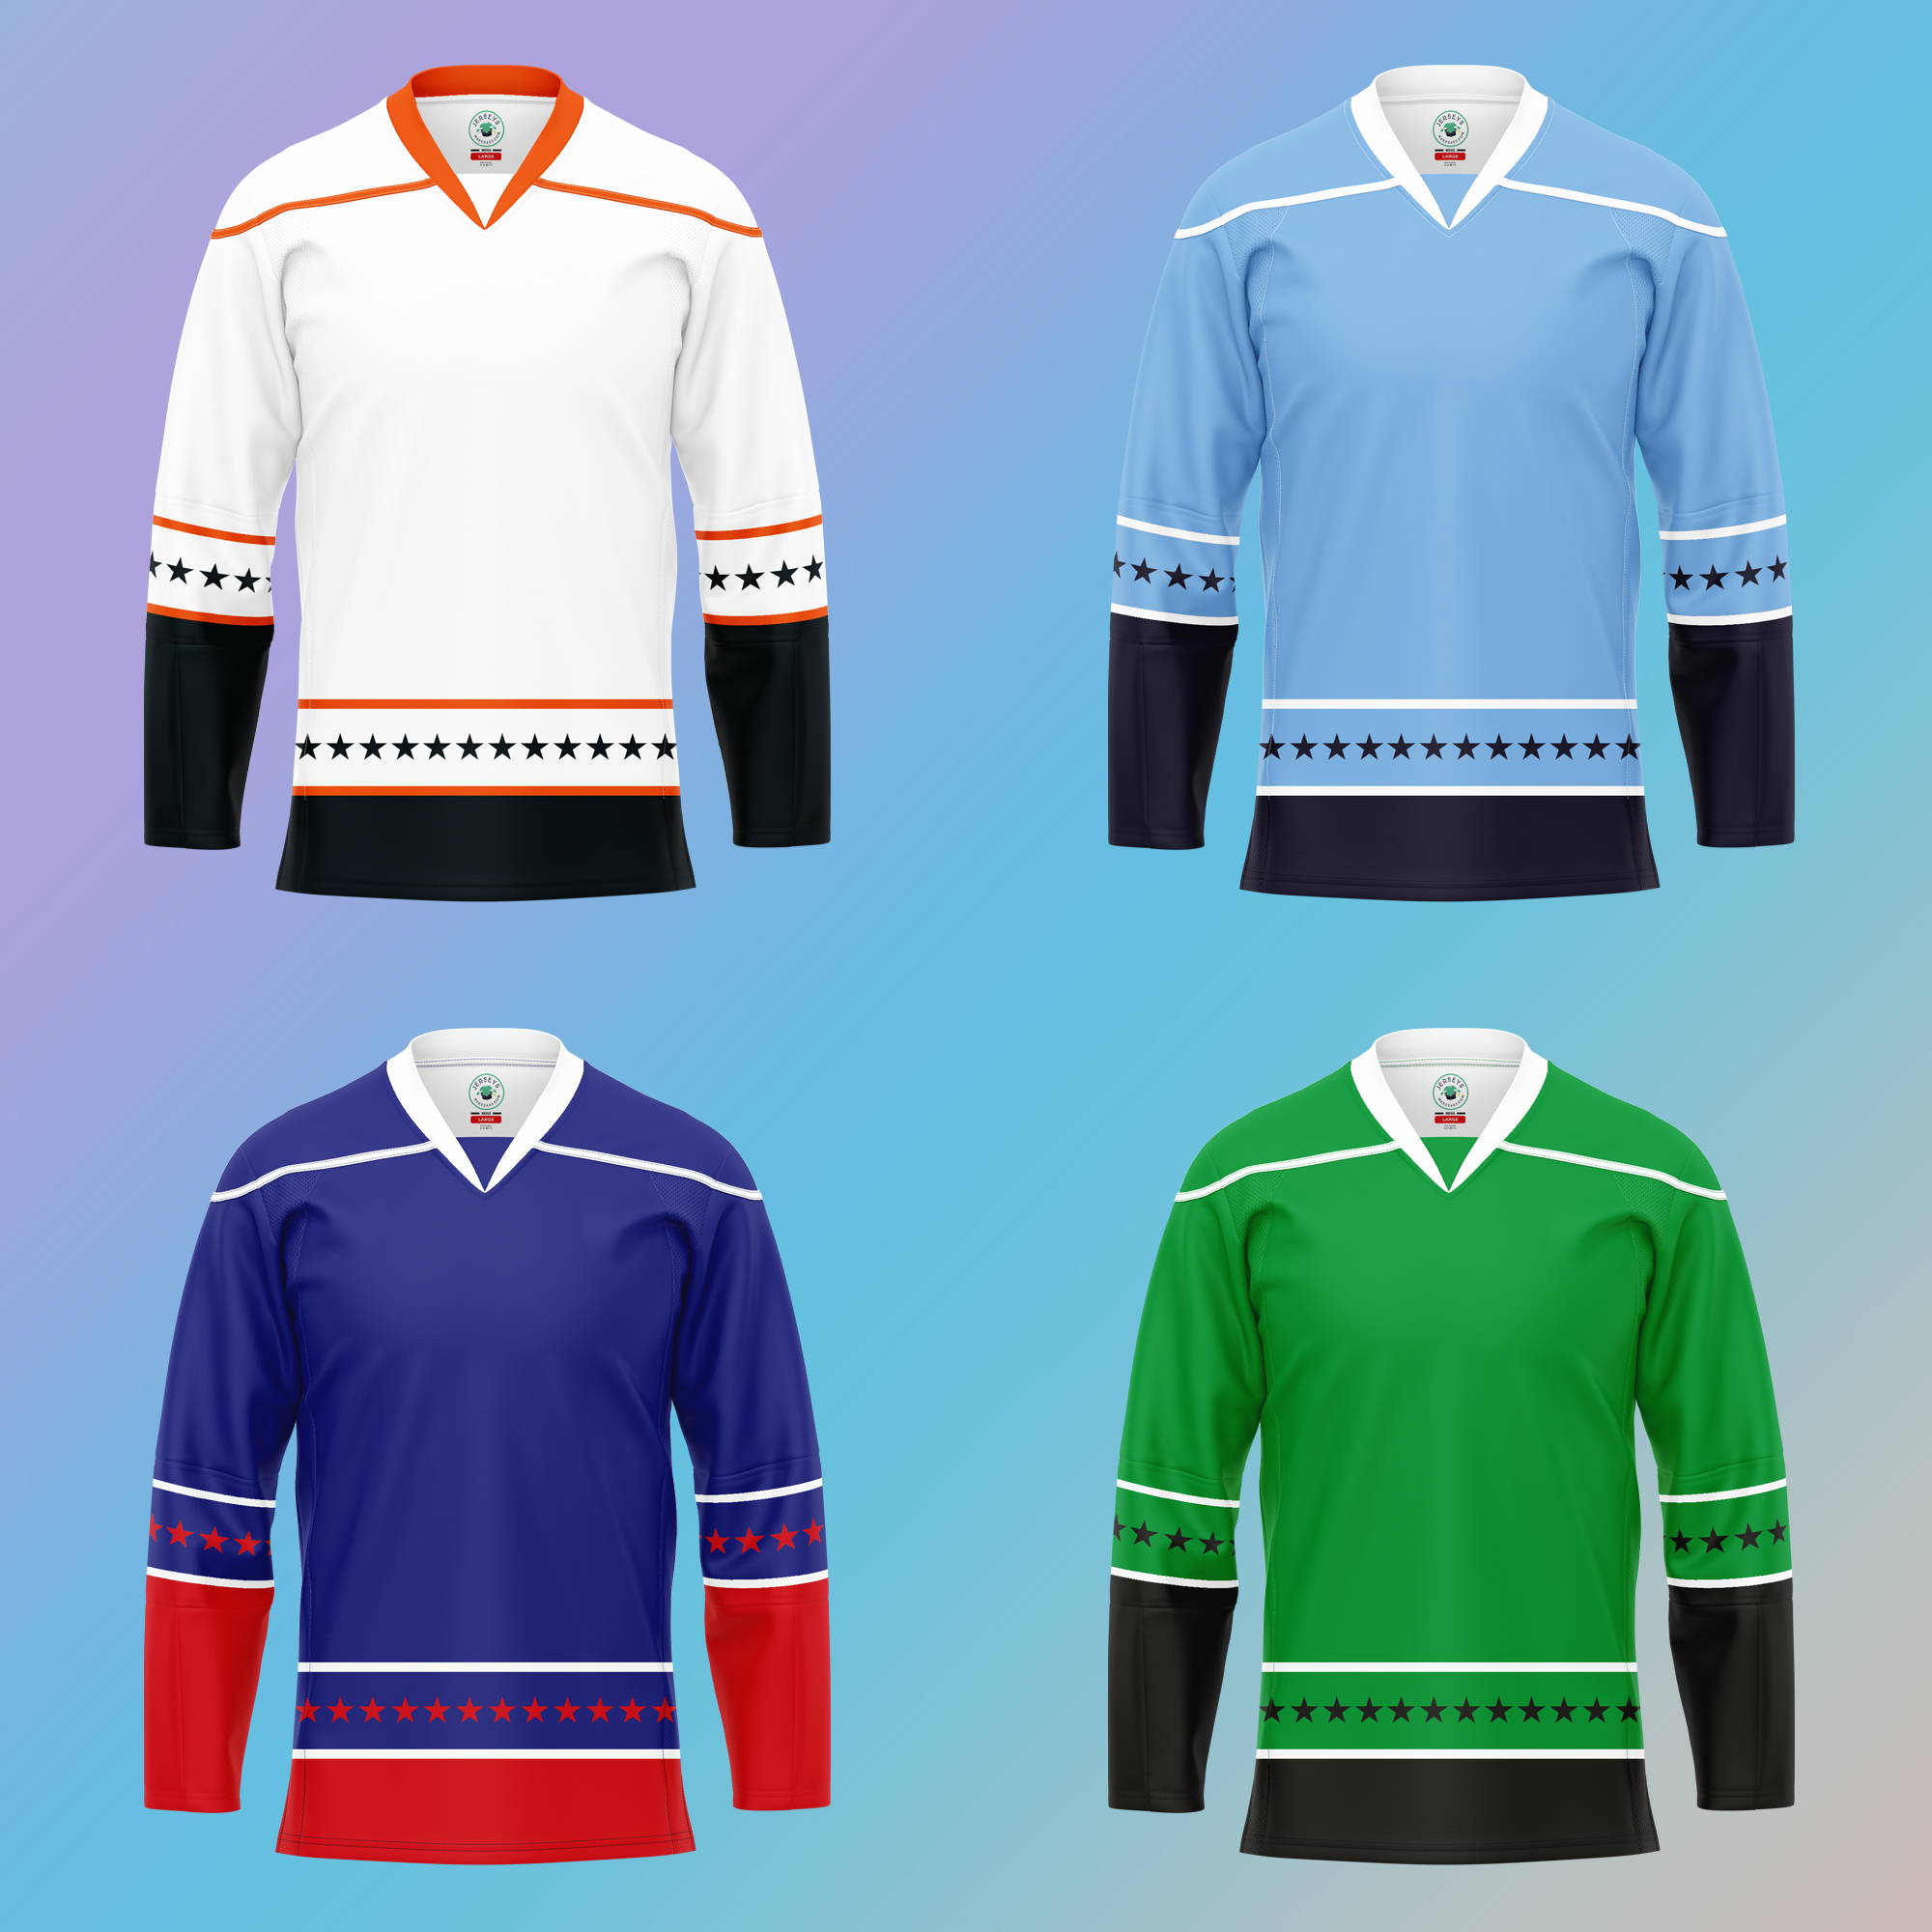 How I got to design a Pro hockey team jersey – Sports Templates